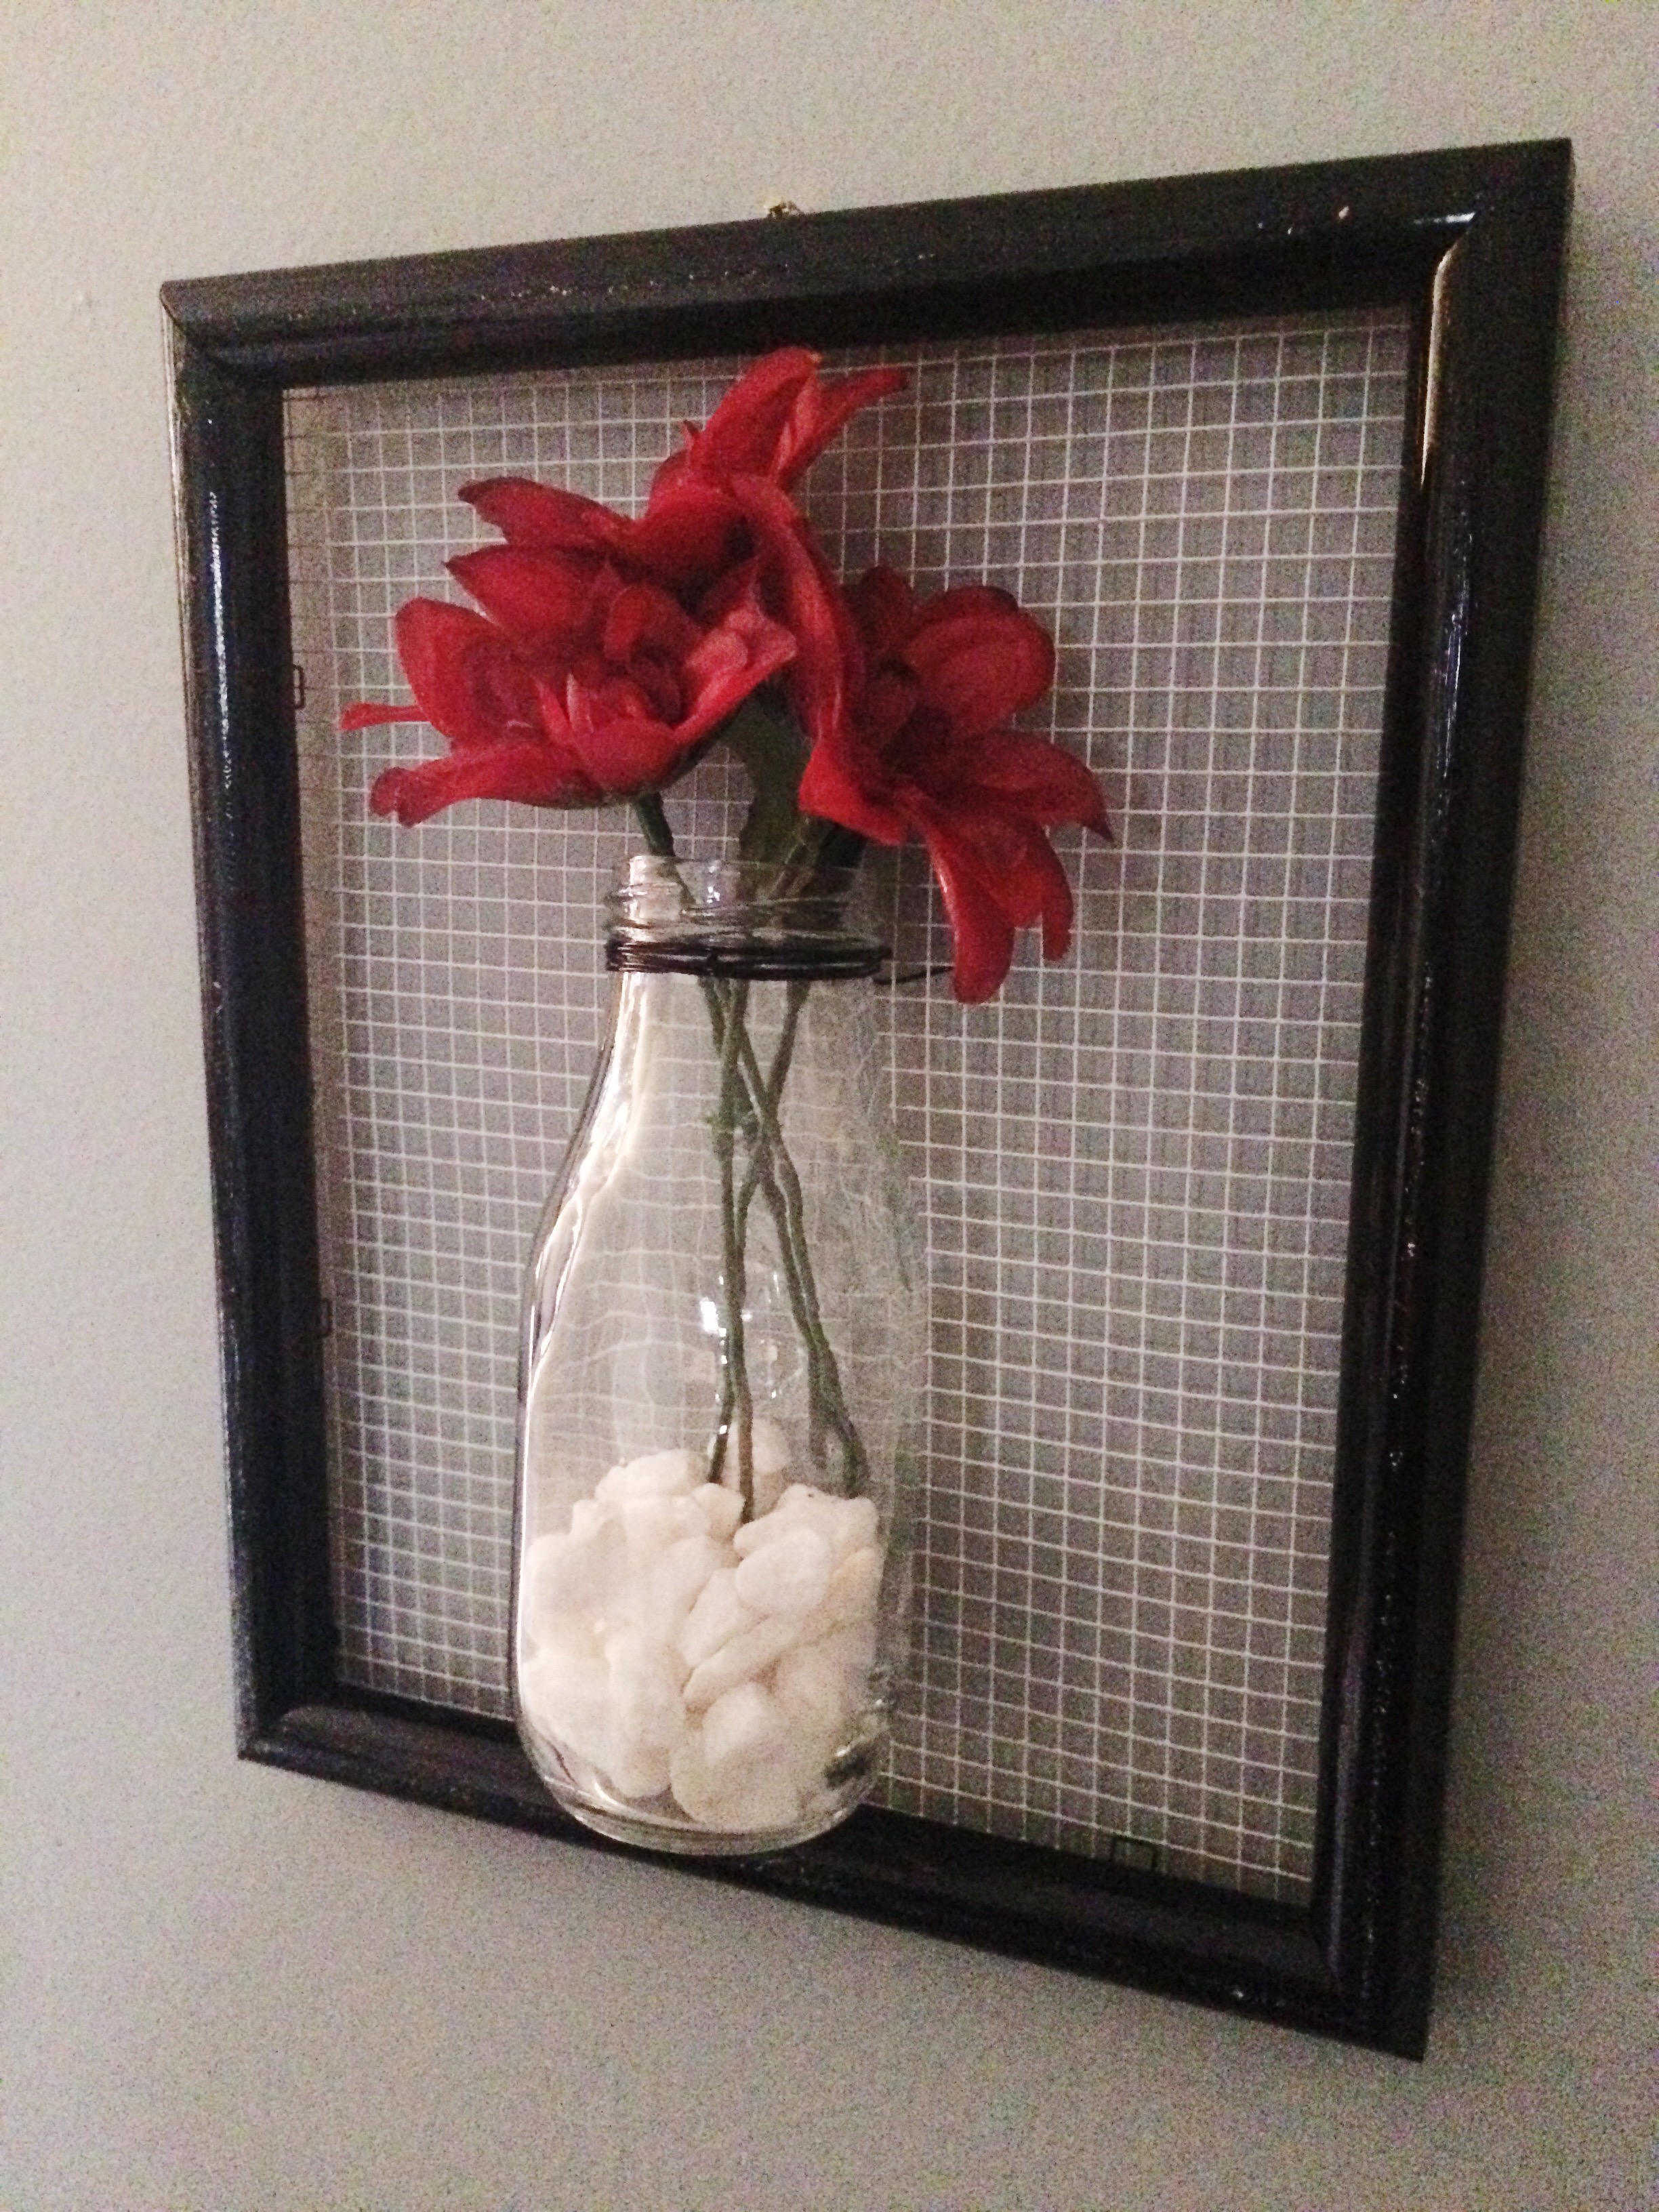 Framed Flower Vases (with hardware cloth or chicken wire) — Maria Makes